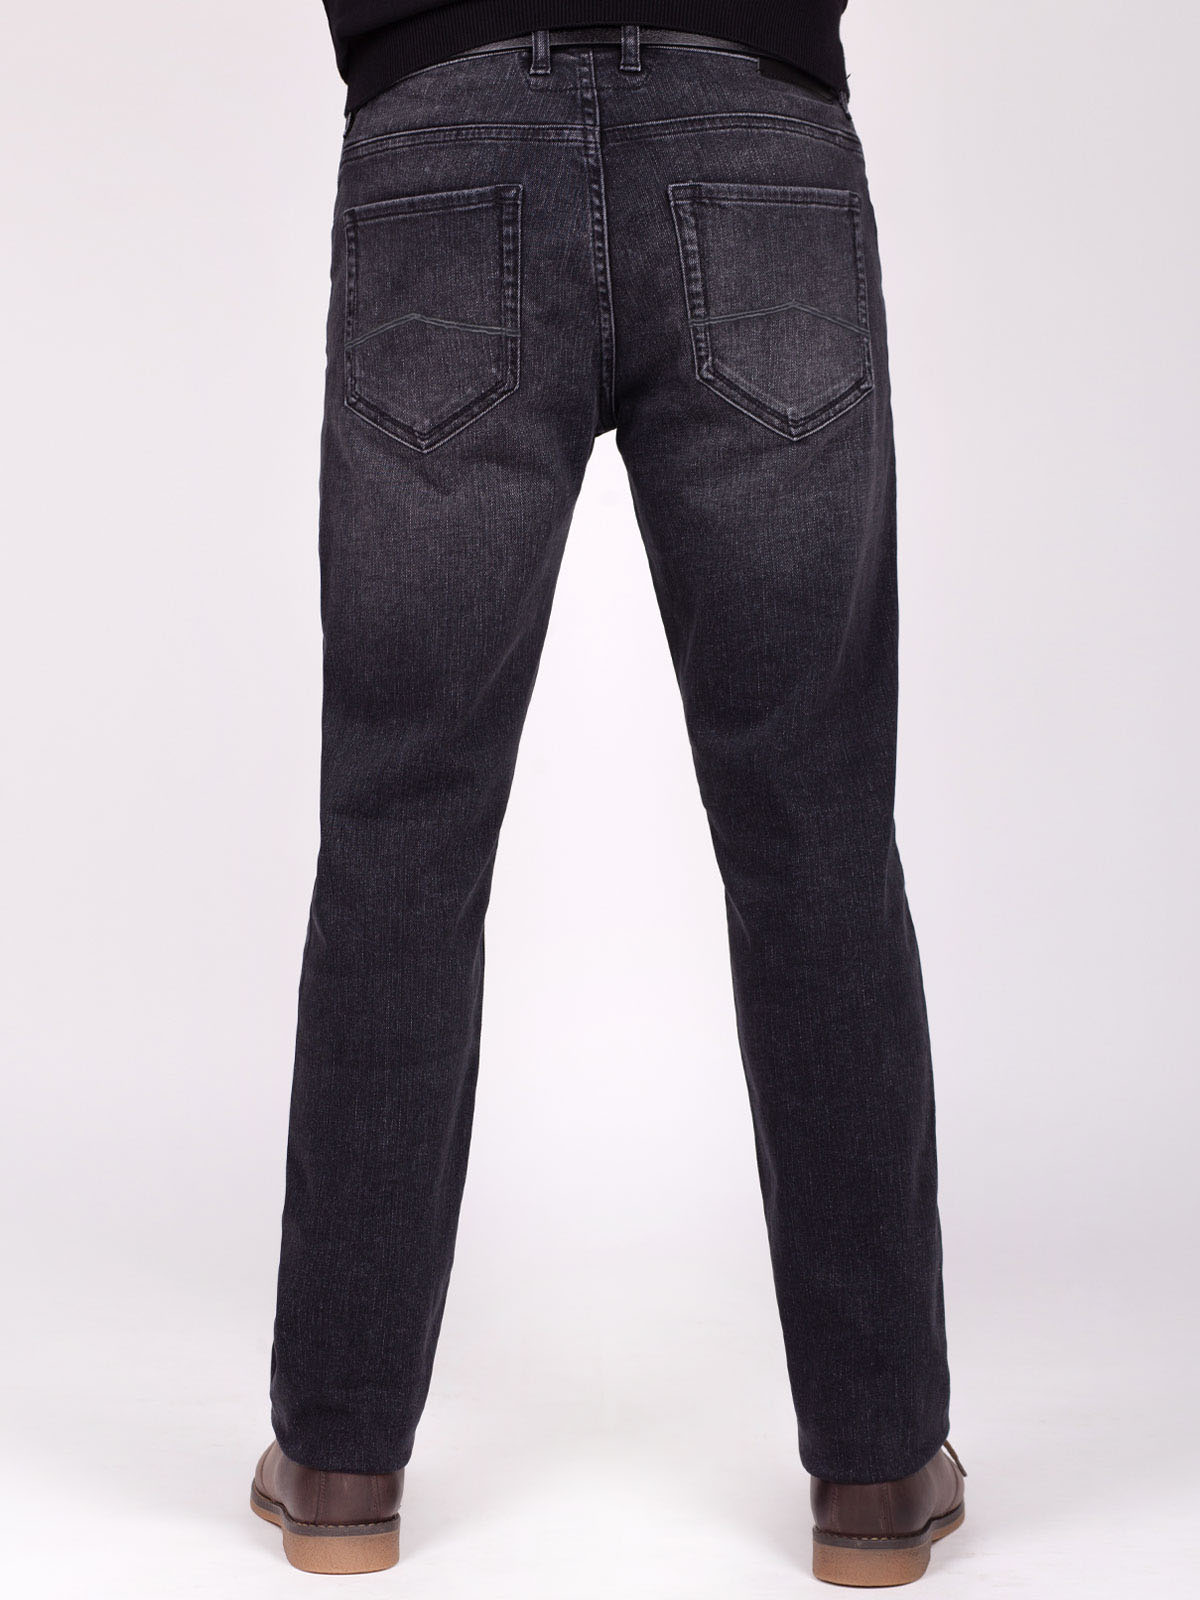 Black slim fit jeans with trit effect - 62160 € 78.18 img3